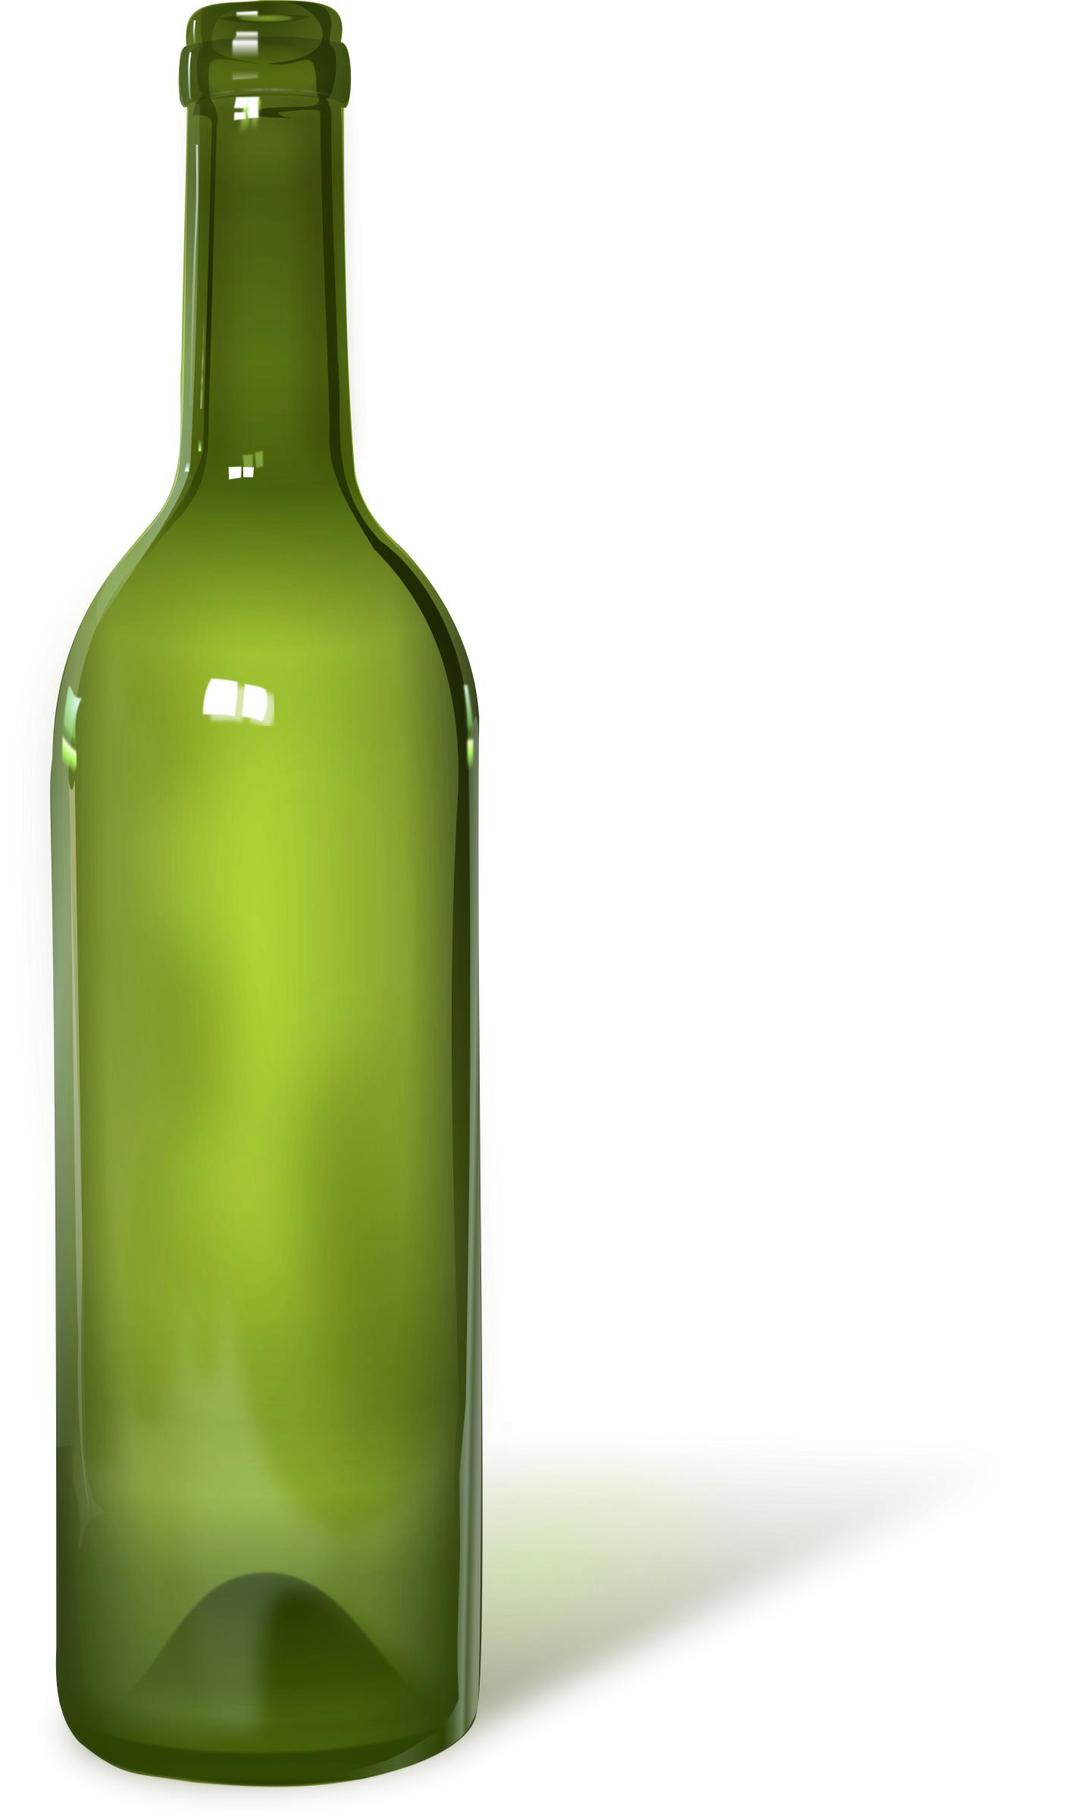 Bottle - detailed (with shadow) png transparent